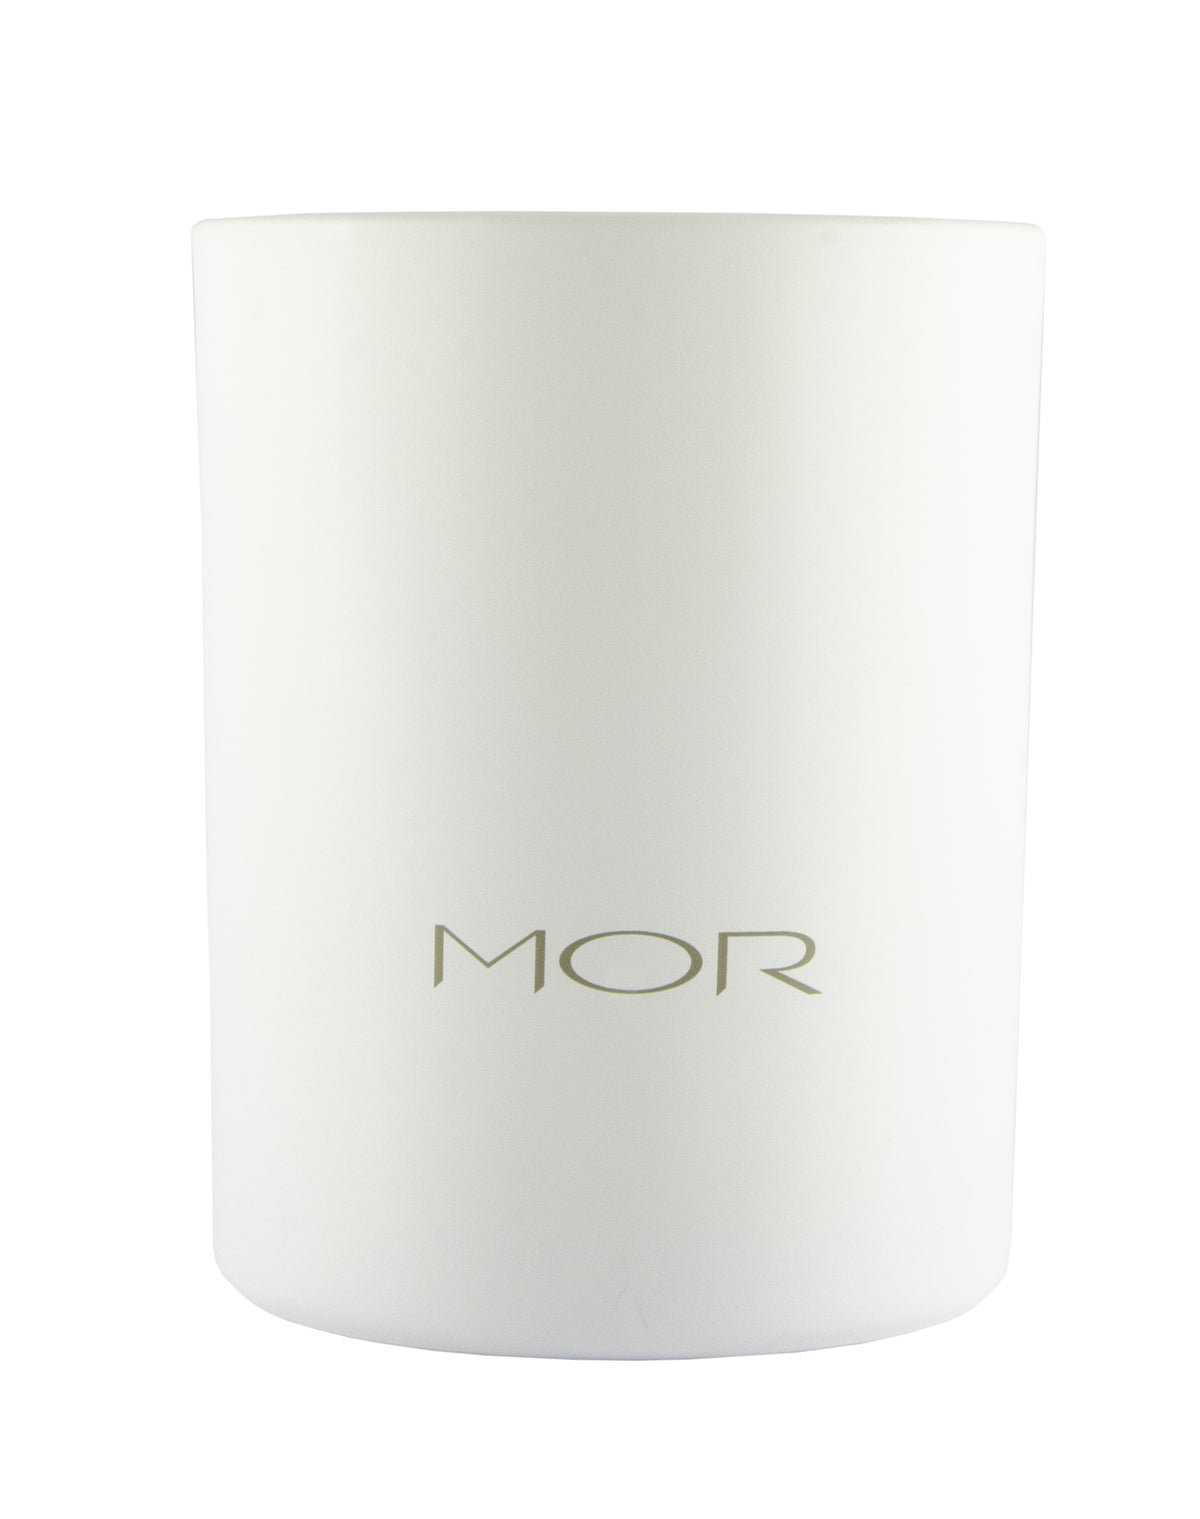 MOR Boutique After The Ball | Soy Candle 250g